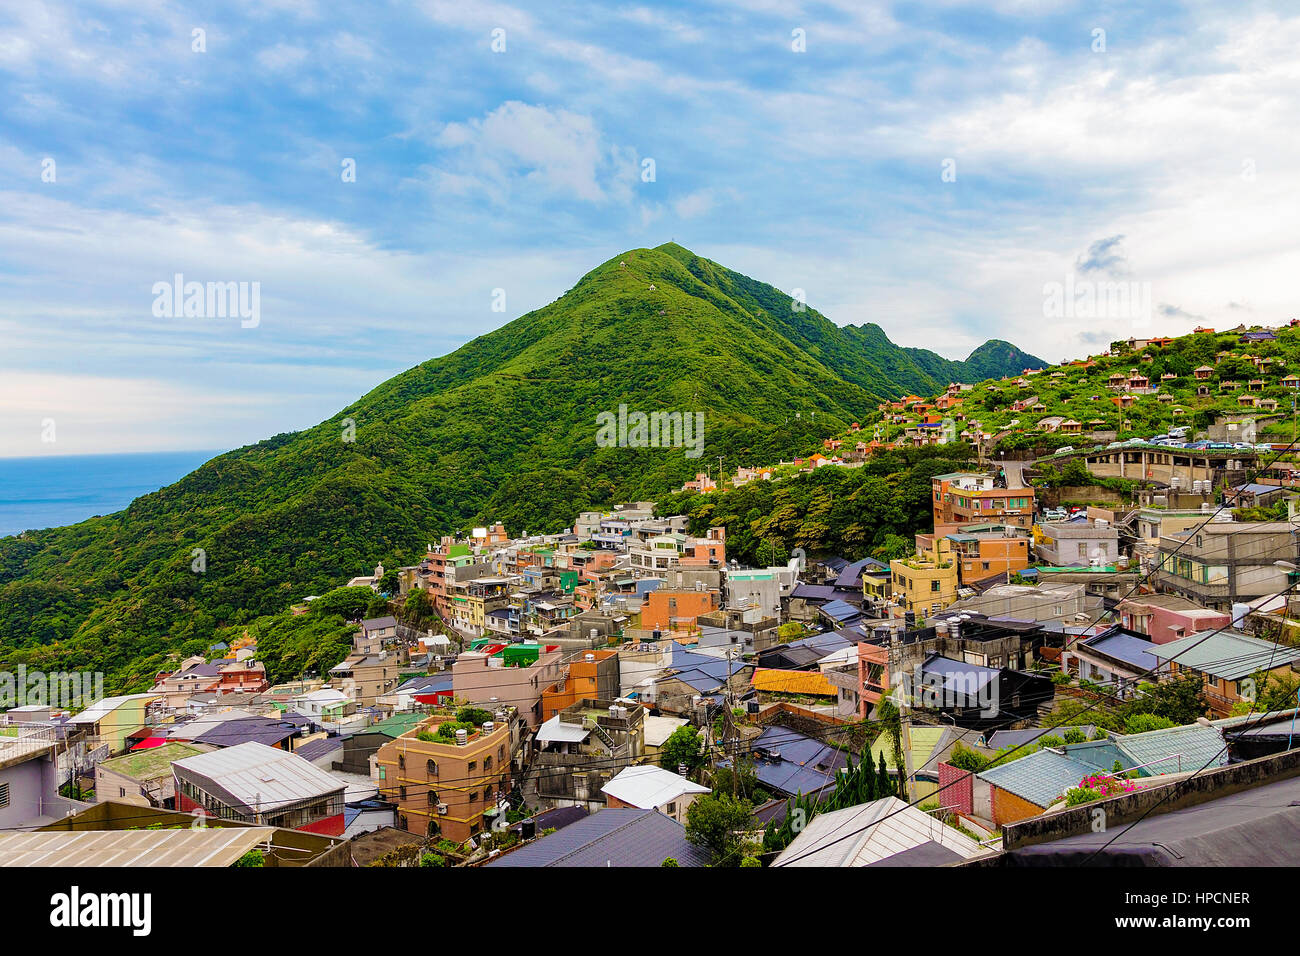 Hillside houses and buildings in Jiufen village Taiwan Stock Photo